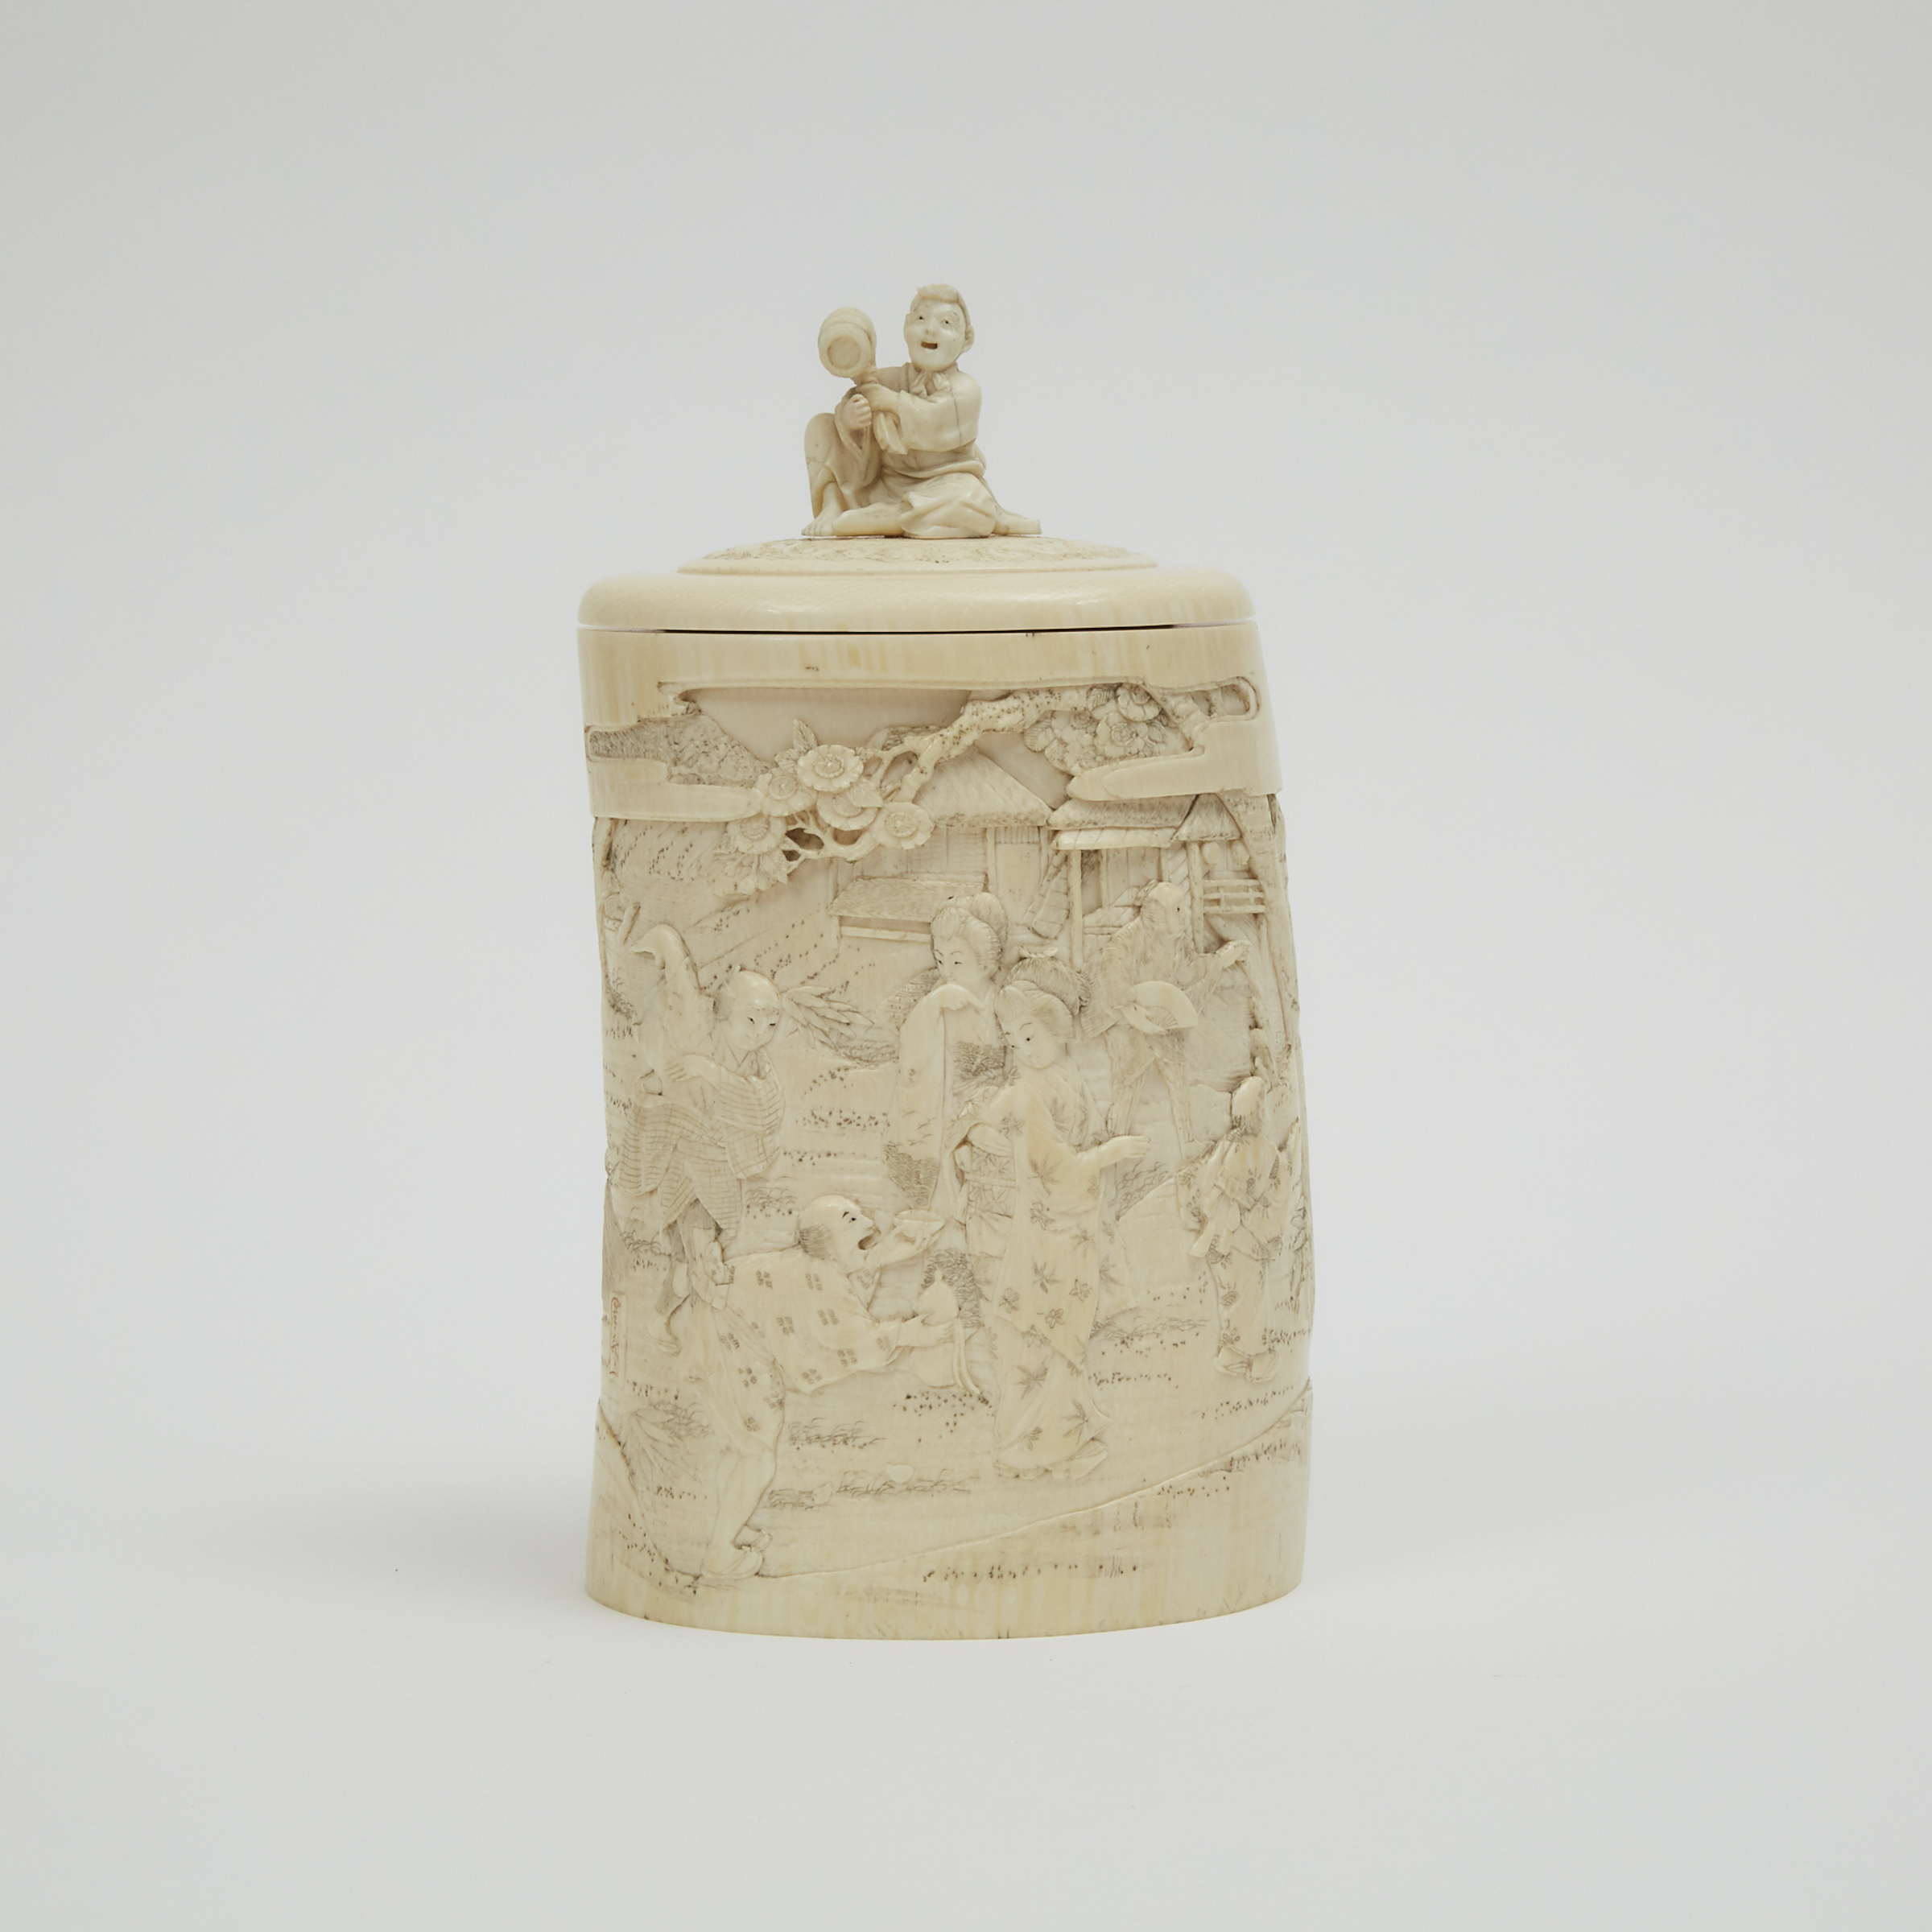 A Japanese Ivory Lidded Container, Meiji Period